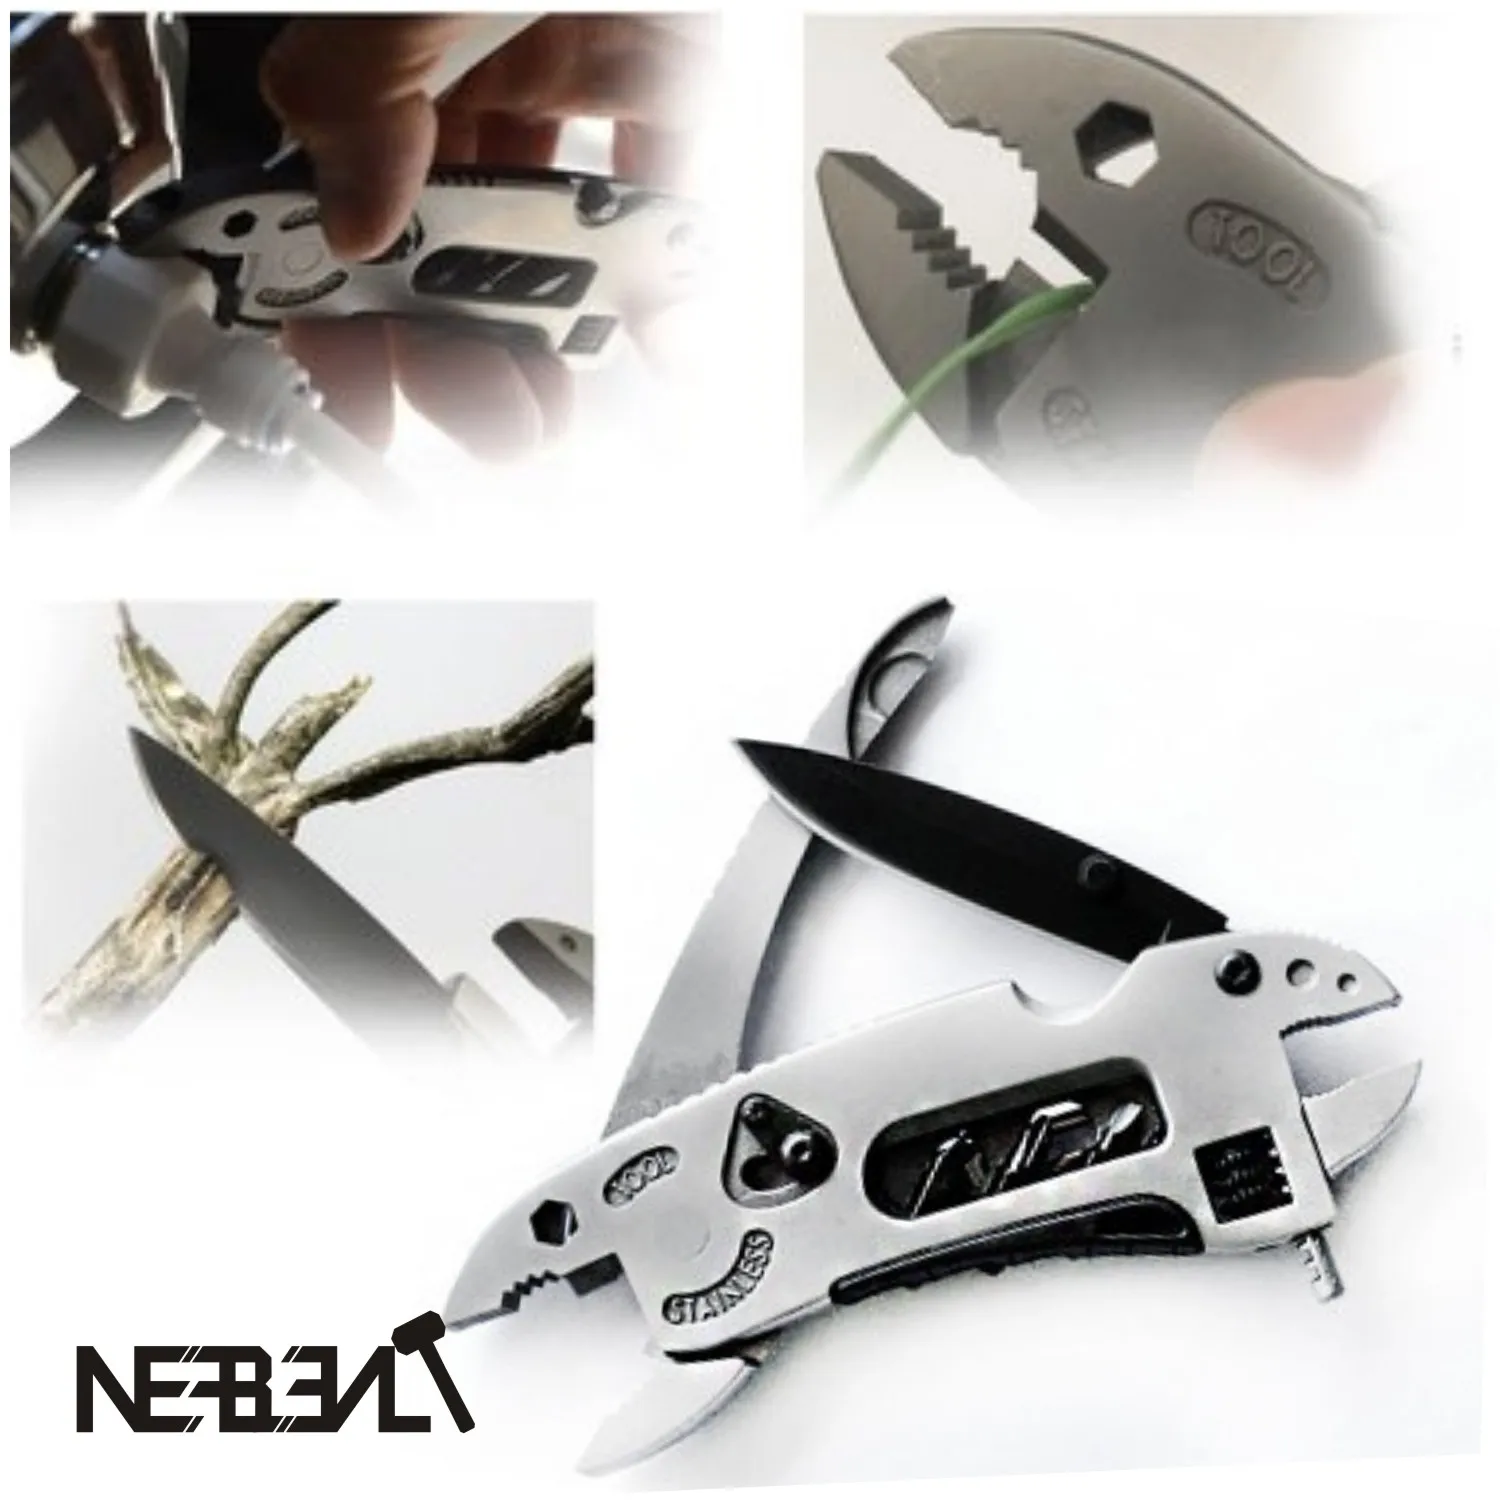 Outdoor Multitool Pliers Pocket Knife Screwdriver Set Kit Adjustable Wrench  Jaw Spanner Mini Repair Hand Tools Pocket Portable